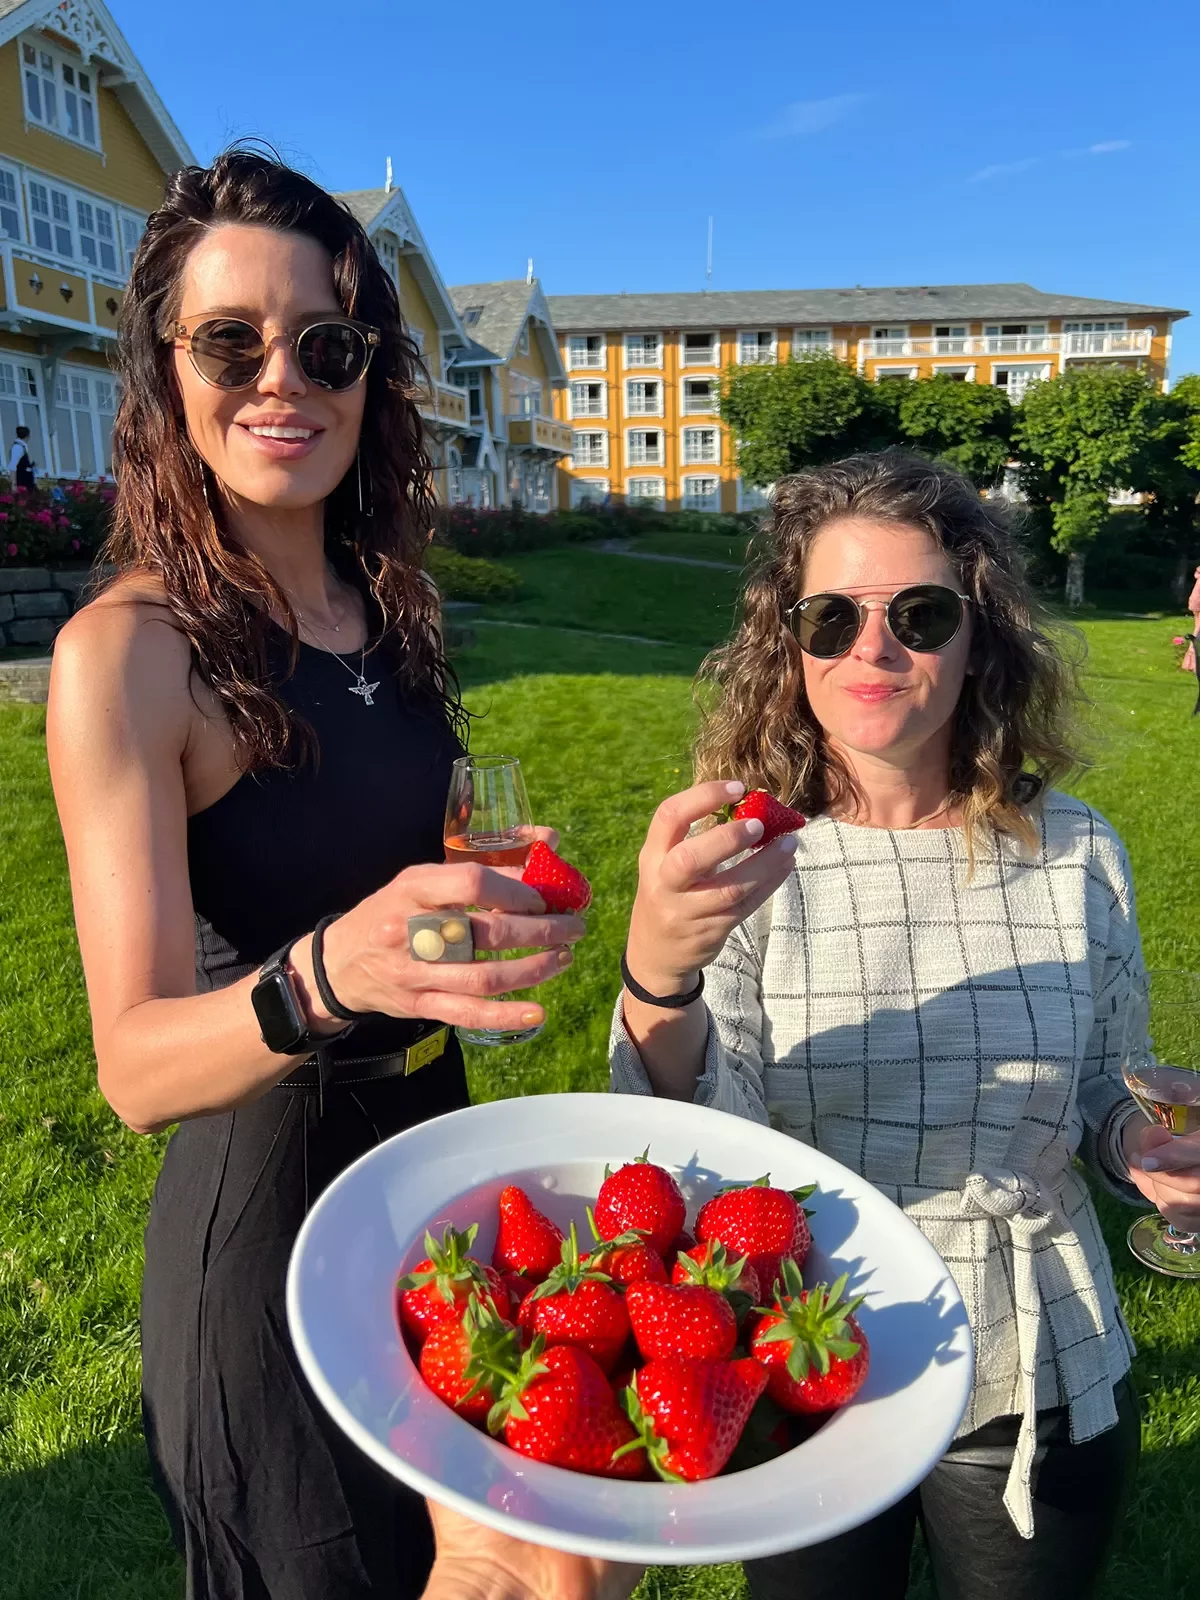 Guest &amp; Plate of Strawberries Norway